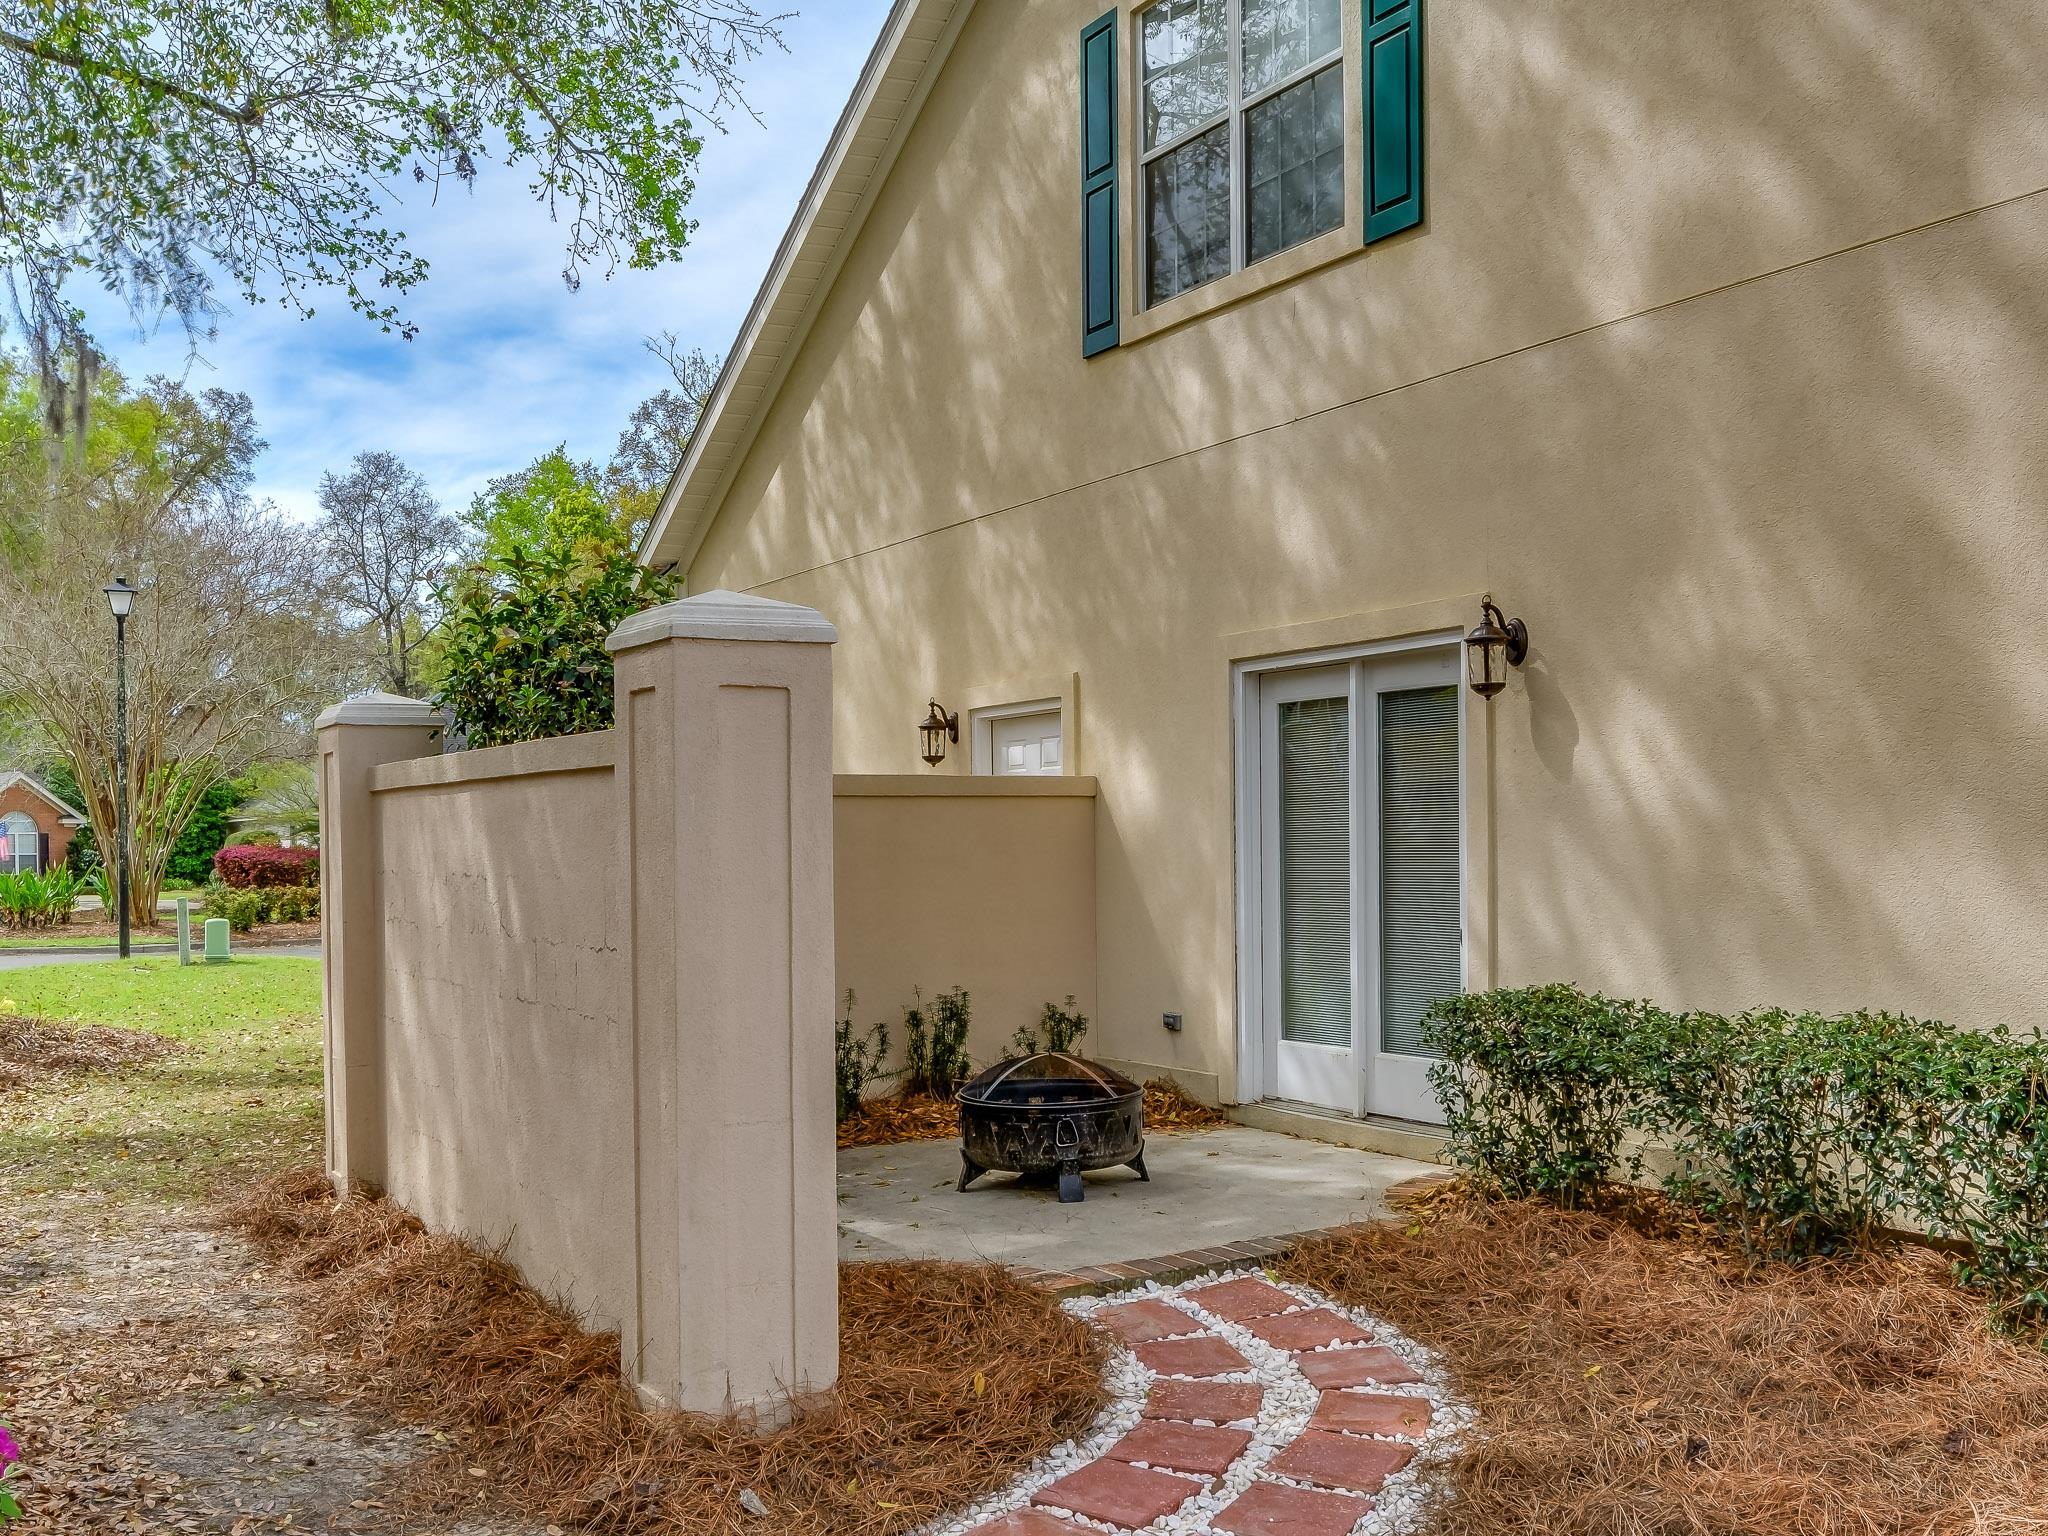 916 Hillcrest Court,TALLAHASSEE,Florida 32308-5060,4 Bedrooms Bedrooms,2 BathroomsBathrooms,Detached single family,916 Hillcrest Court,370219